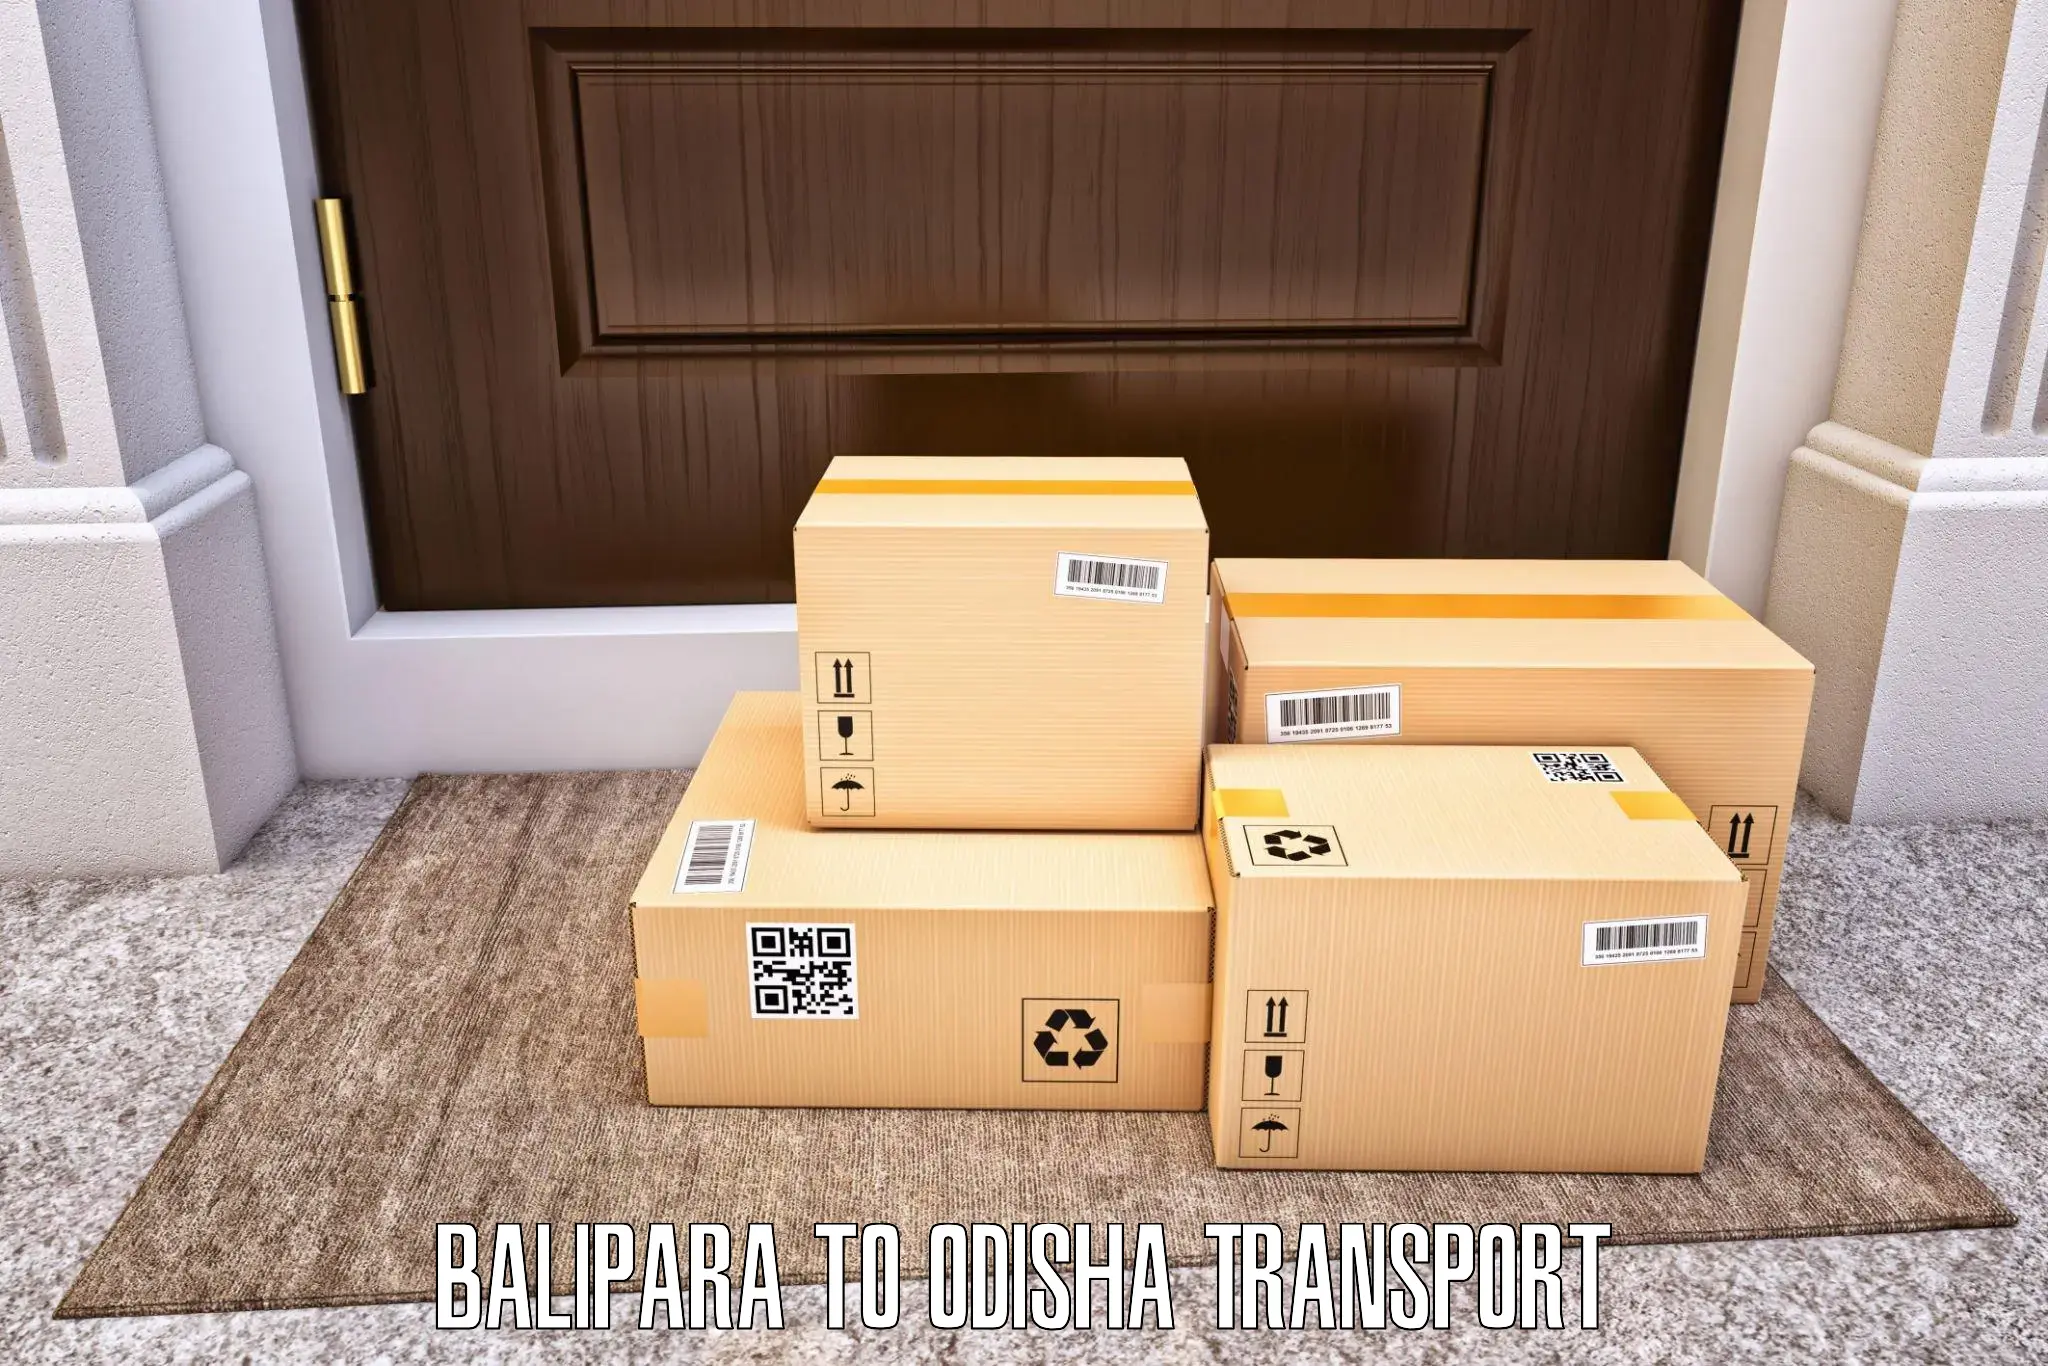 Container transport service Balipara to Sonapur